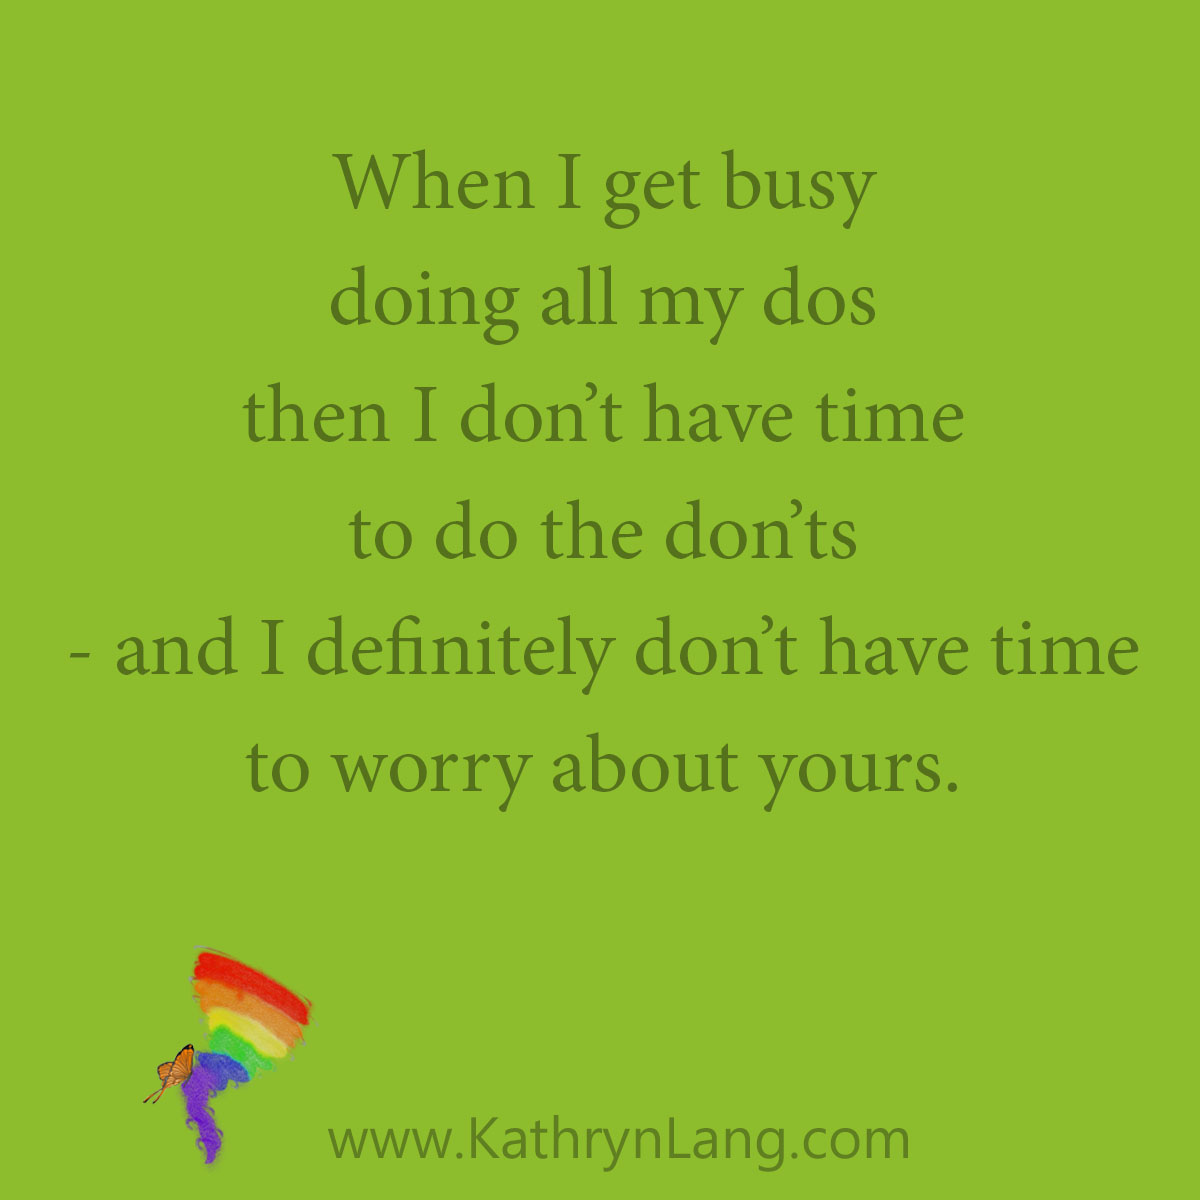 When I get busy doing all my dos then I don’t have time to do the don’ts - and I definitely don’t have time to worry about yours either.